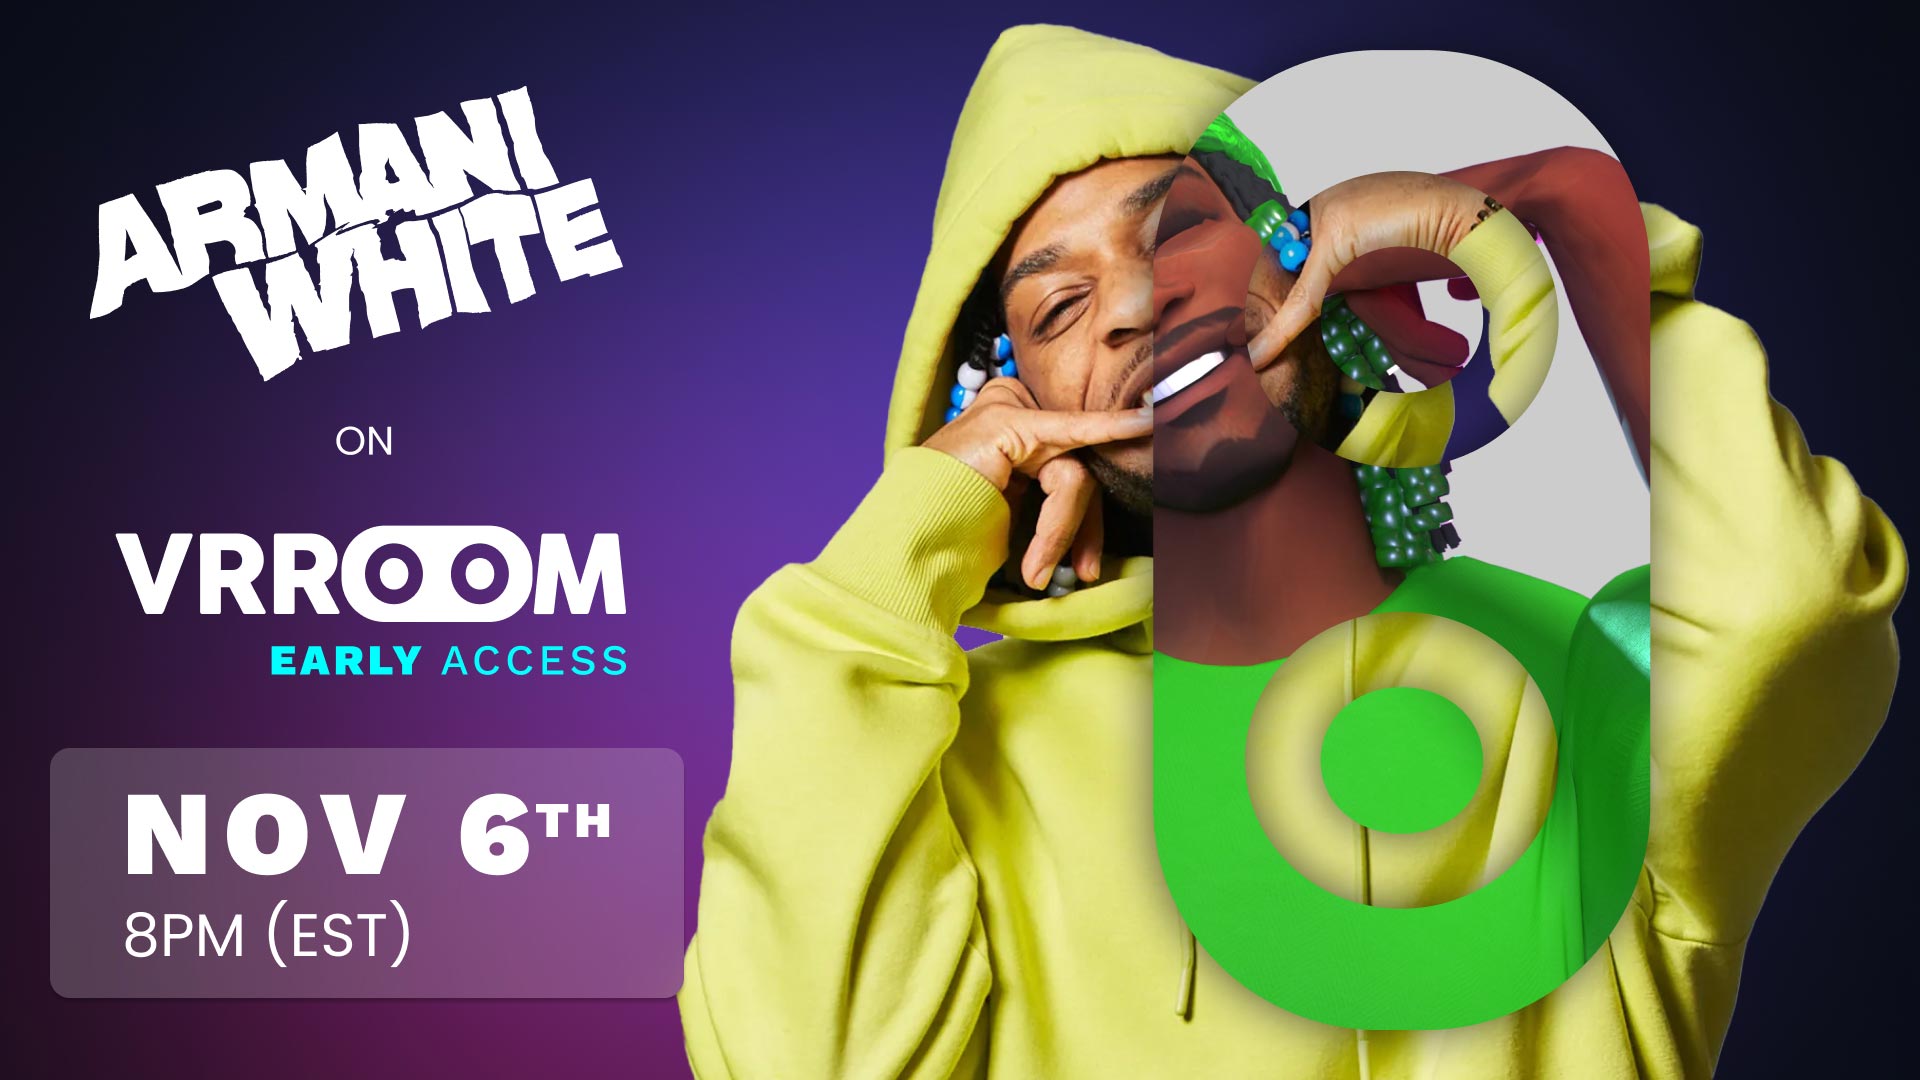 VRROOM announces a BIG update and a VR concert featuring Armani White ...